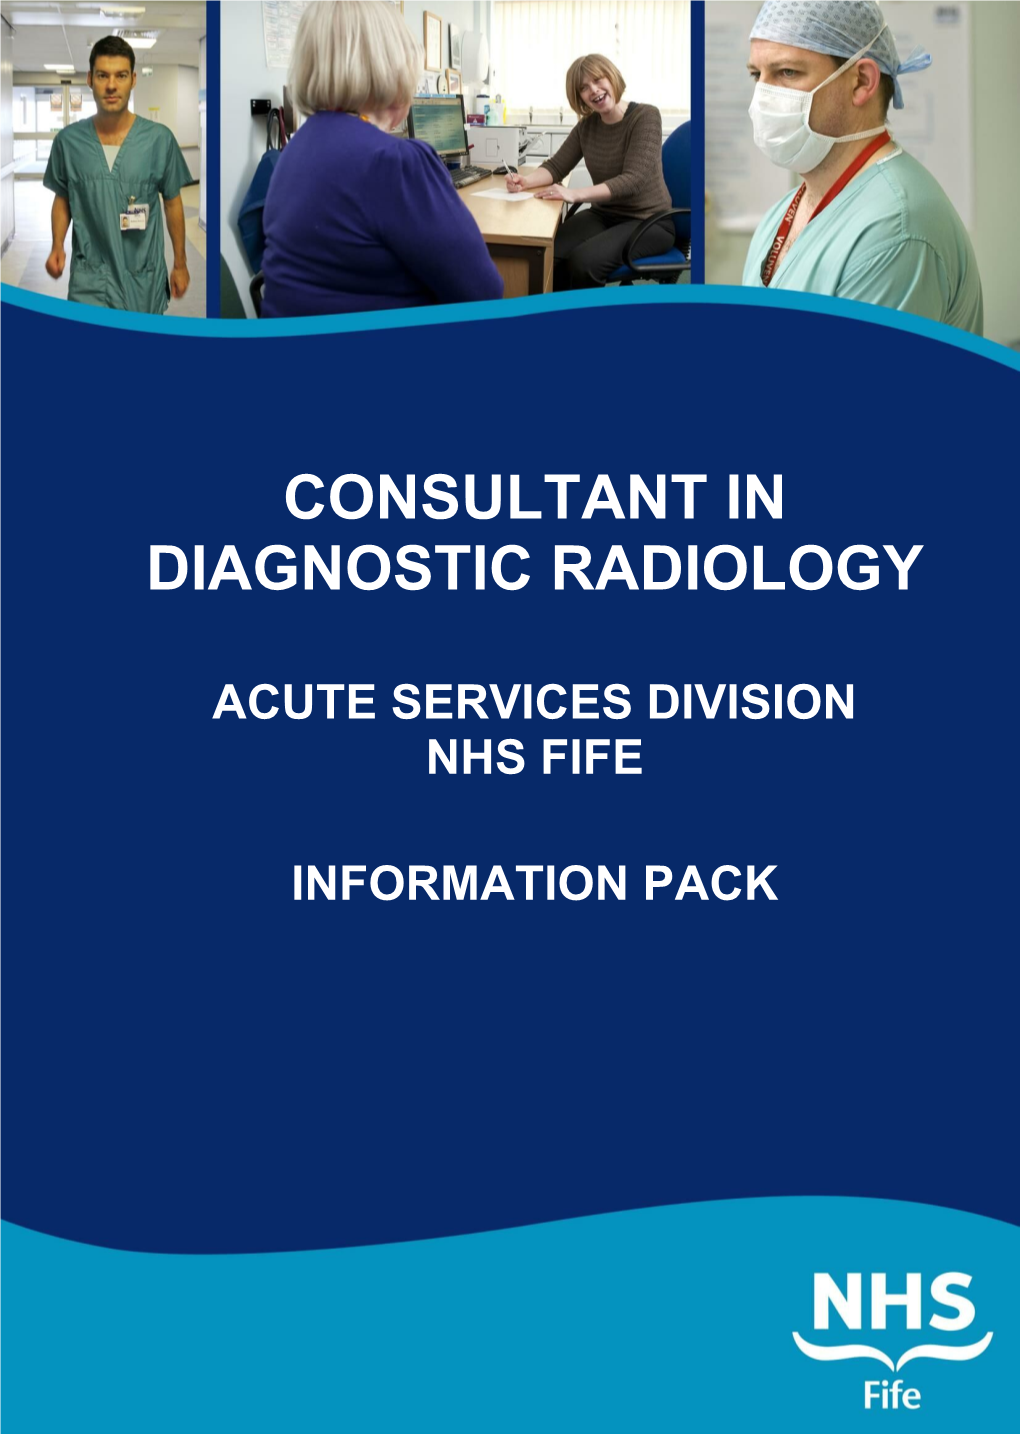 Consultant in Diagnostic Radiology